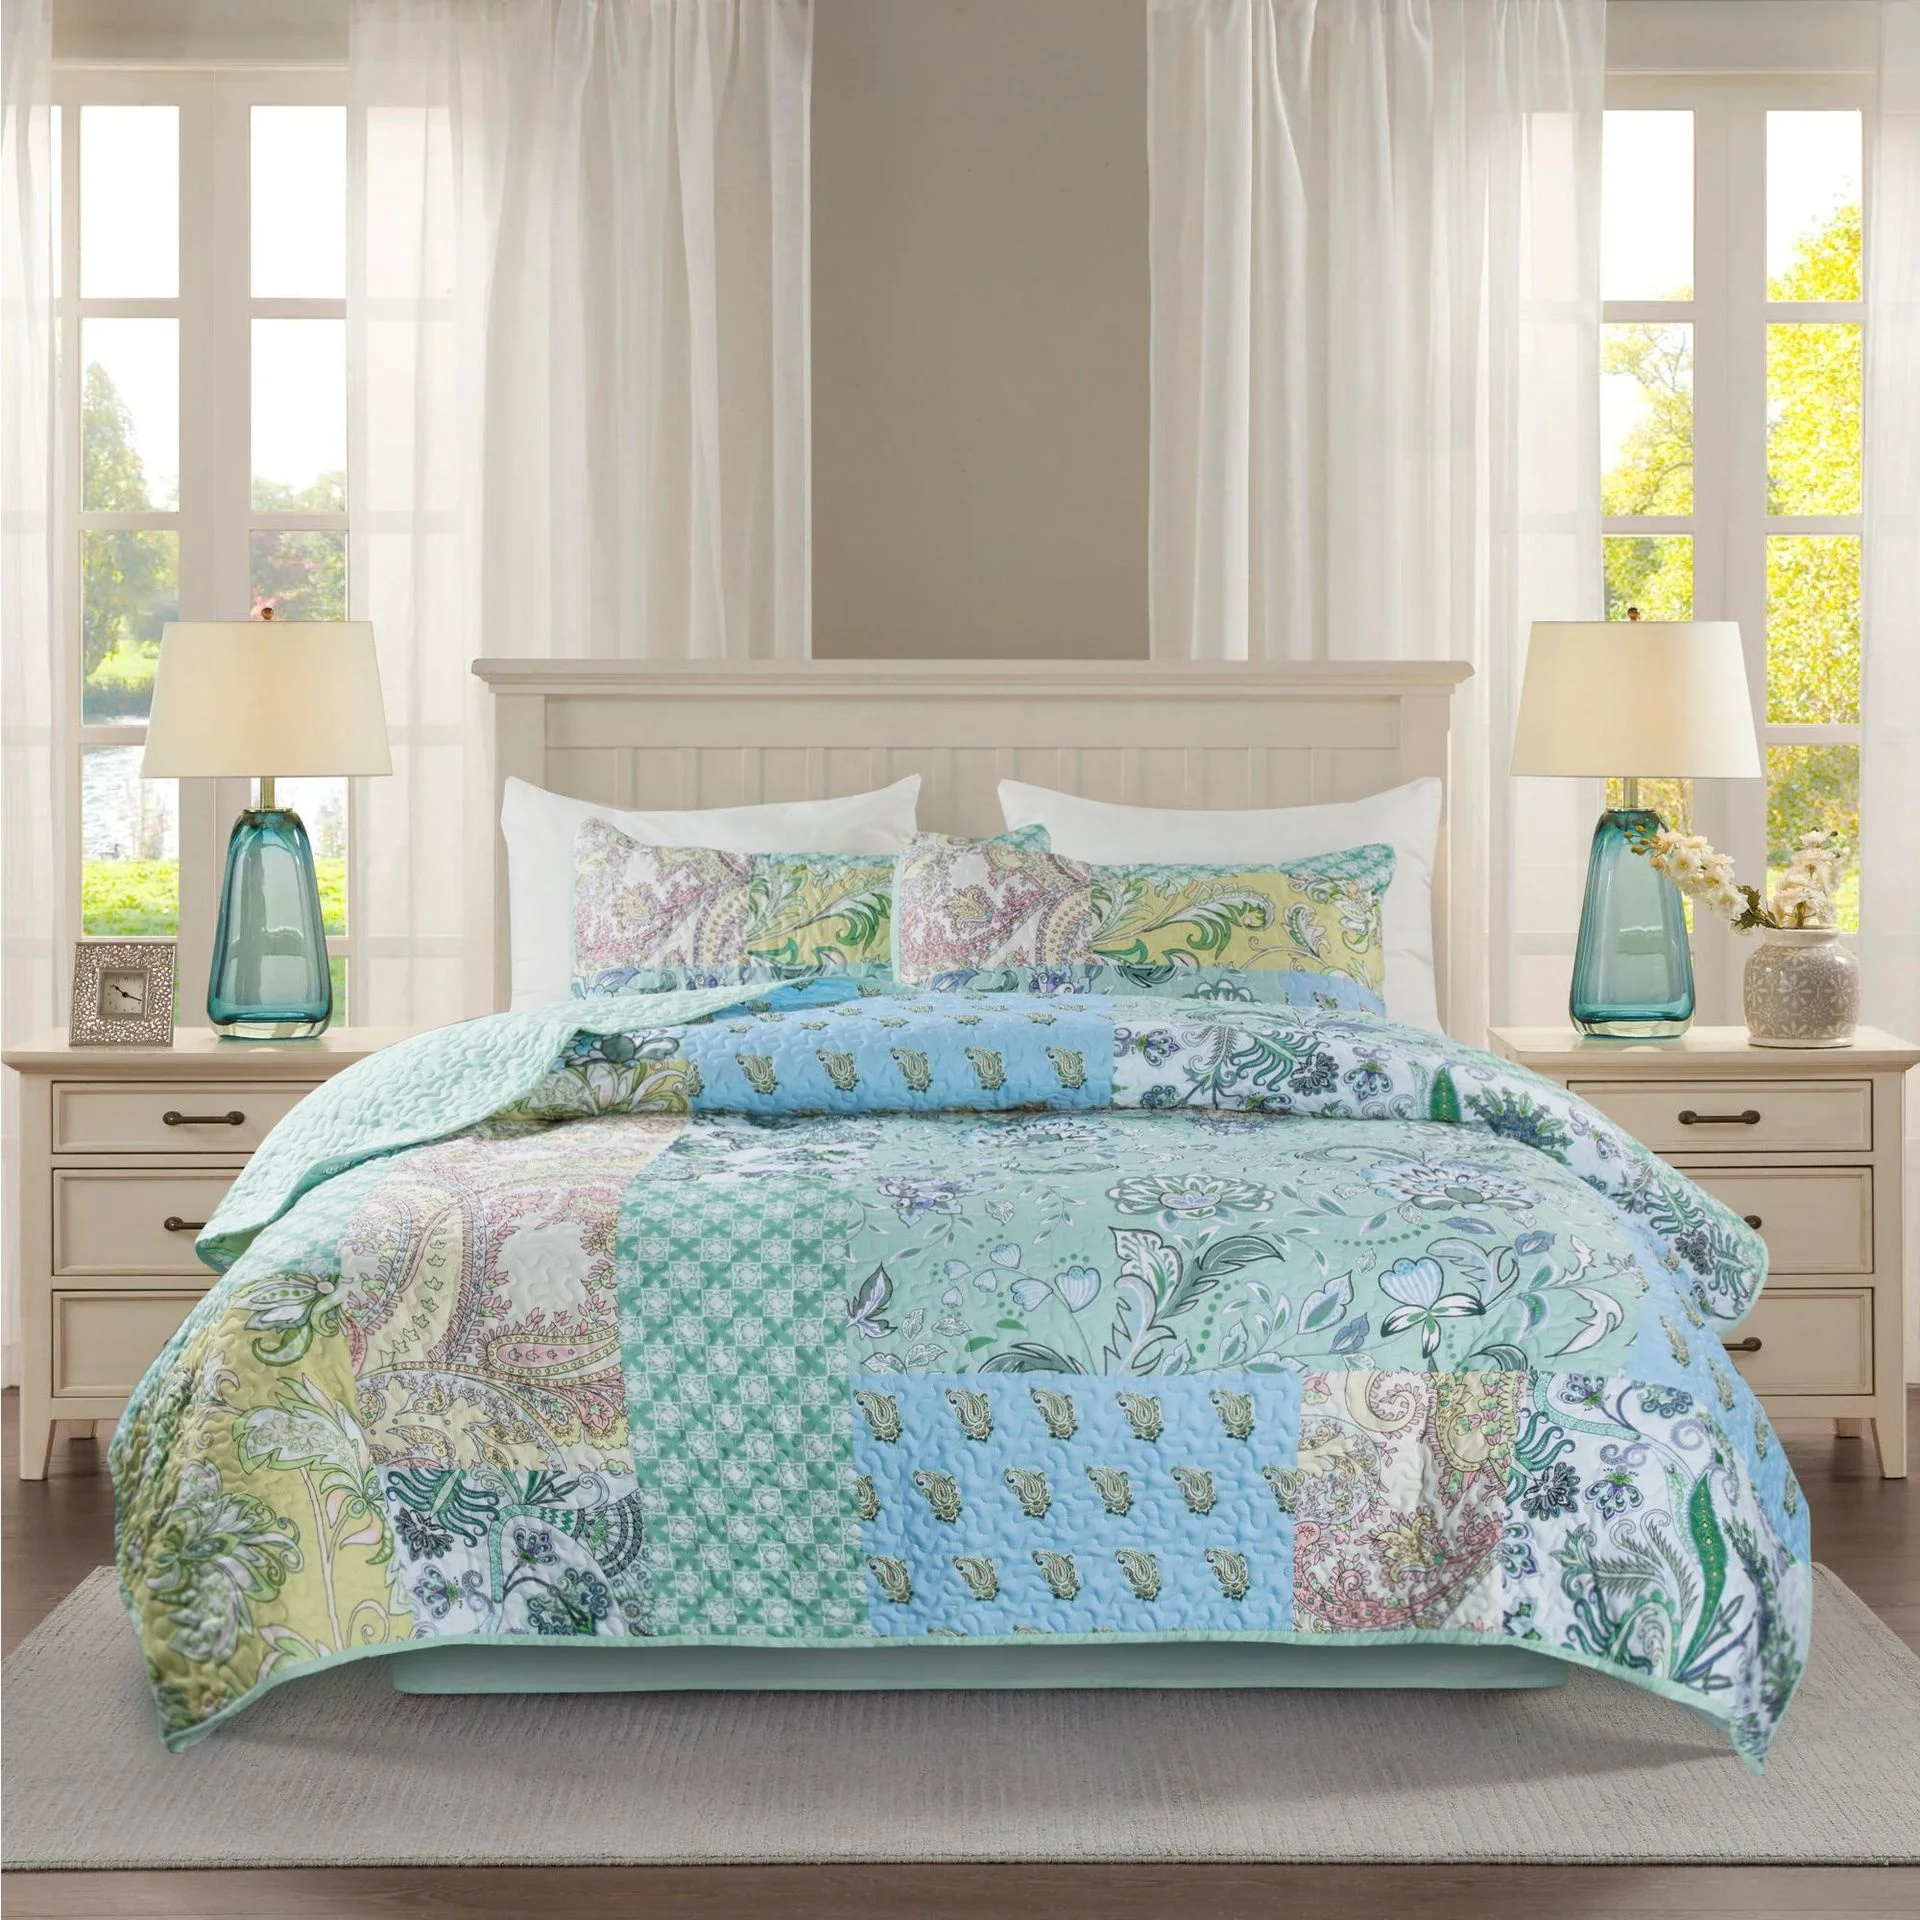 Luxury brand king comforter sets quilted quilts bedding bedspread set luxury twin queen king